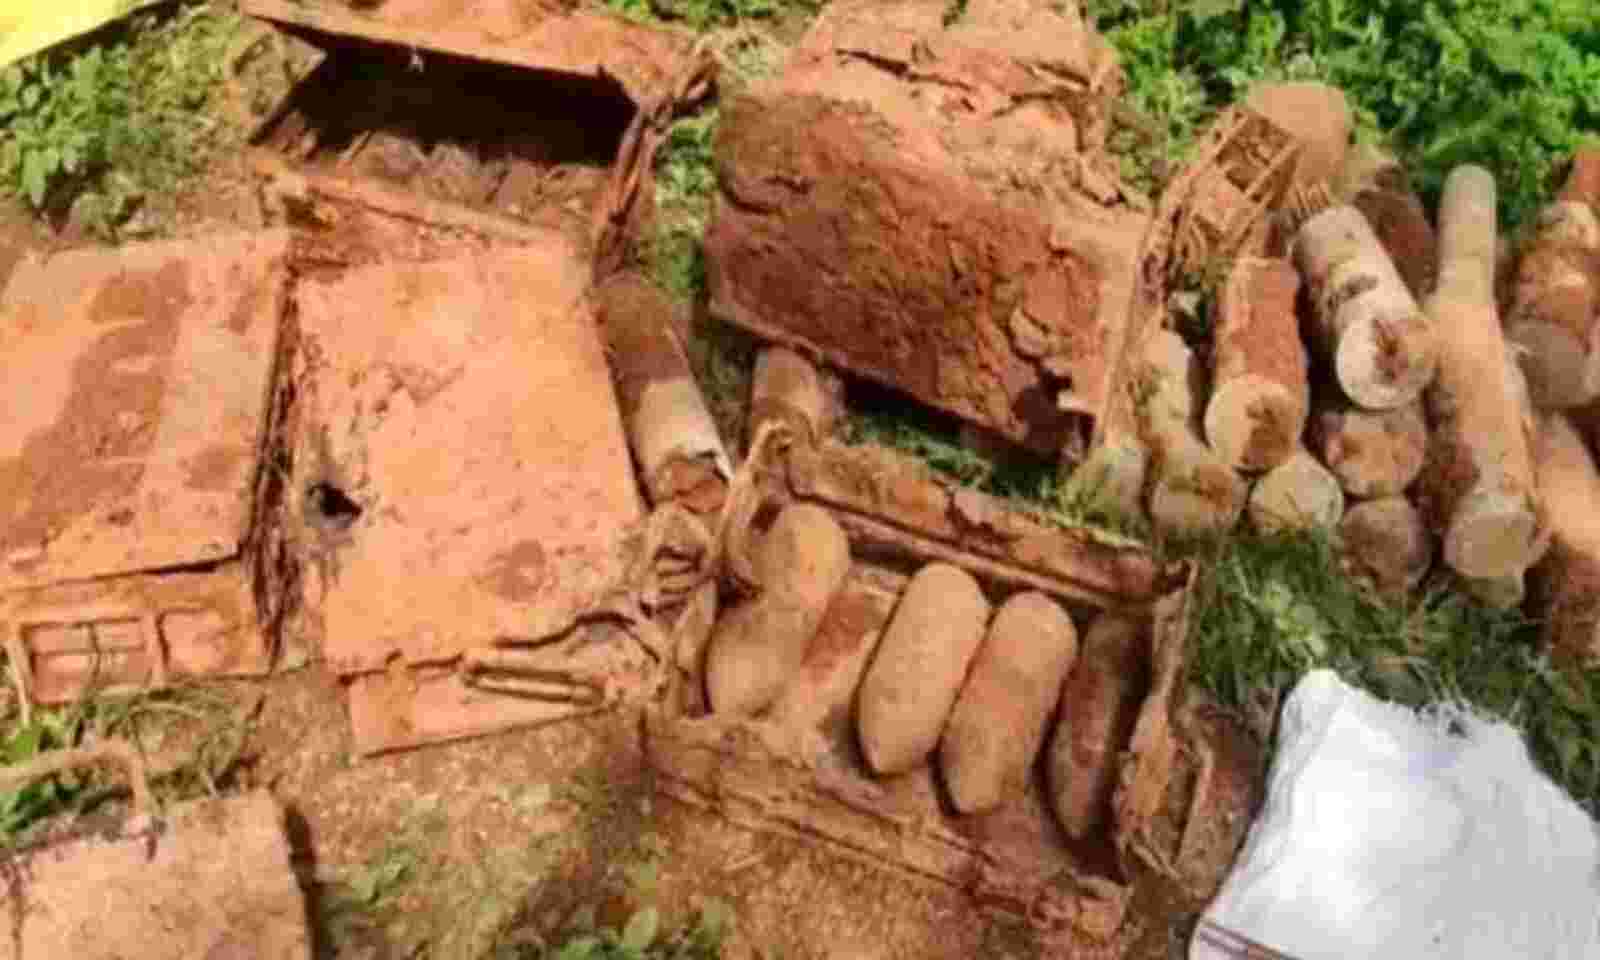 87 Bomb Shells Believed To Be Of World War II Era Found In Manipur